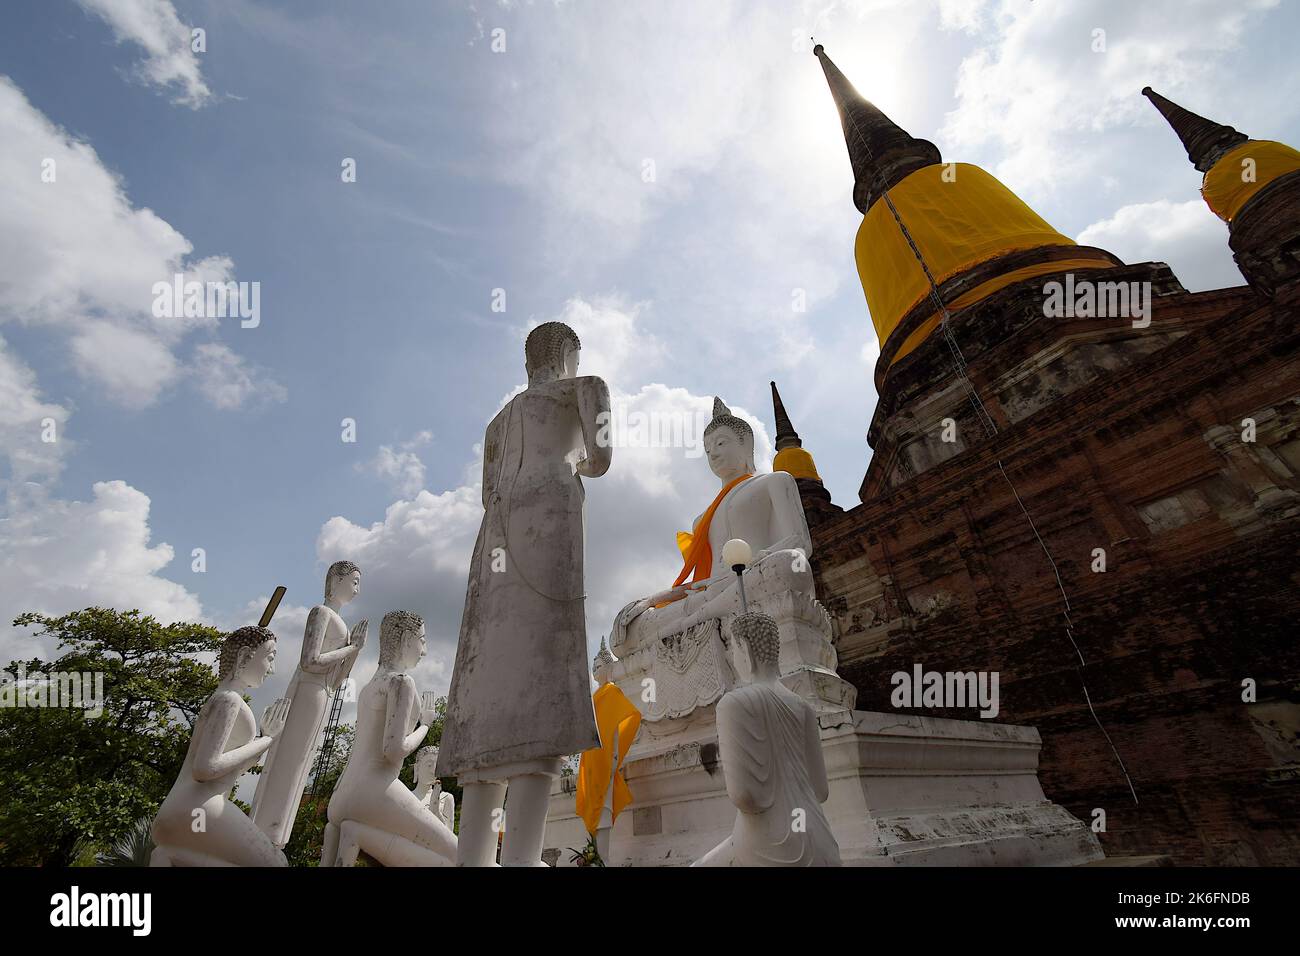 Stone sculptures of people paying respect to the Buddha in 'earth-touching' pose, seen here at base of chedi at Wat Yai Chai Mongkhon, Ayutthaya Stock Photo